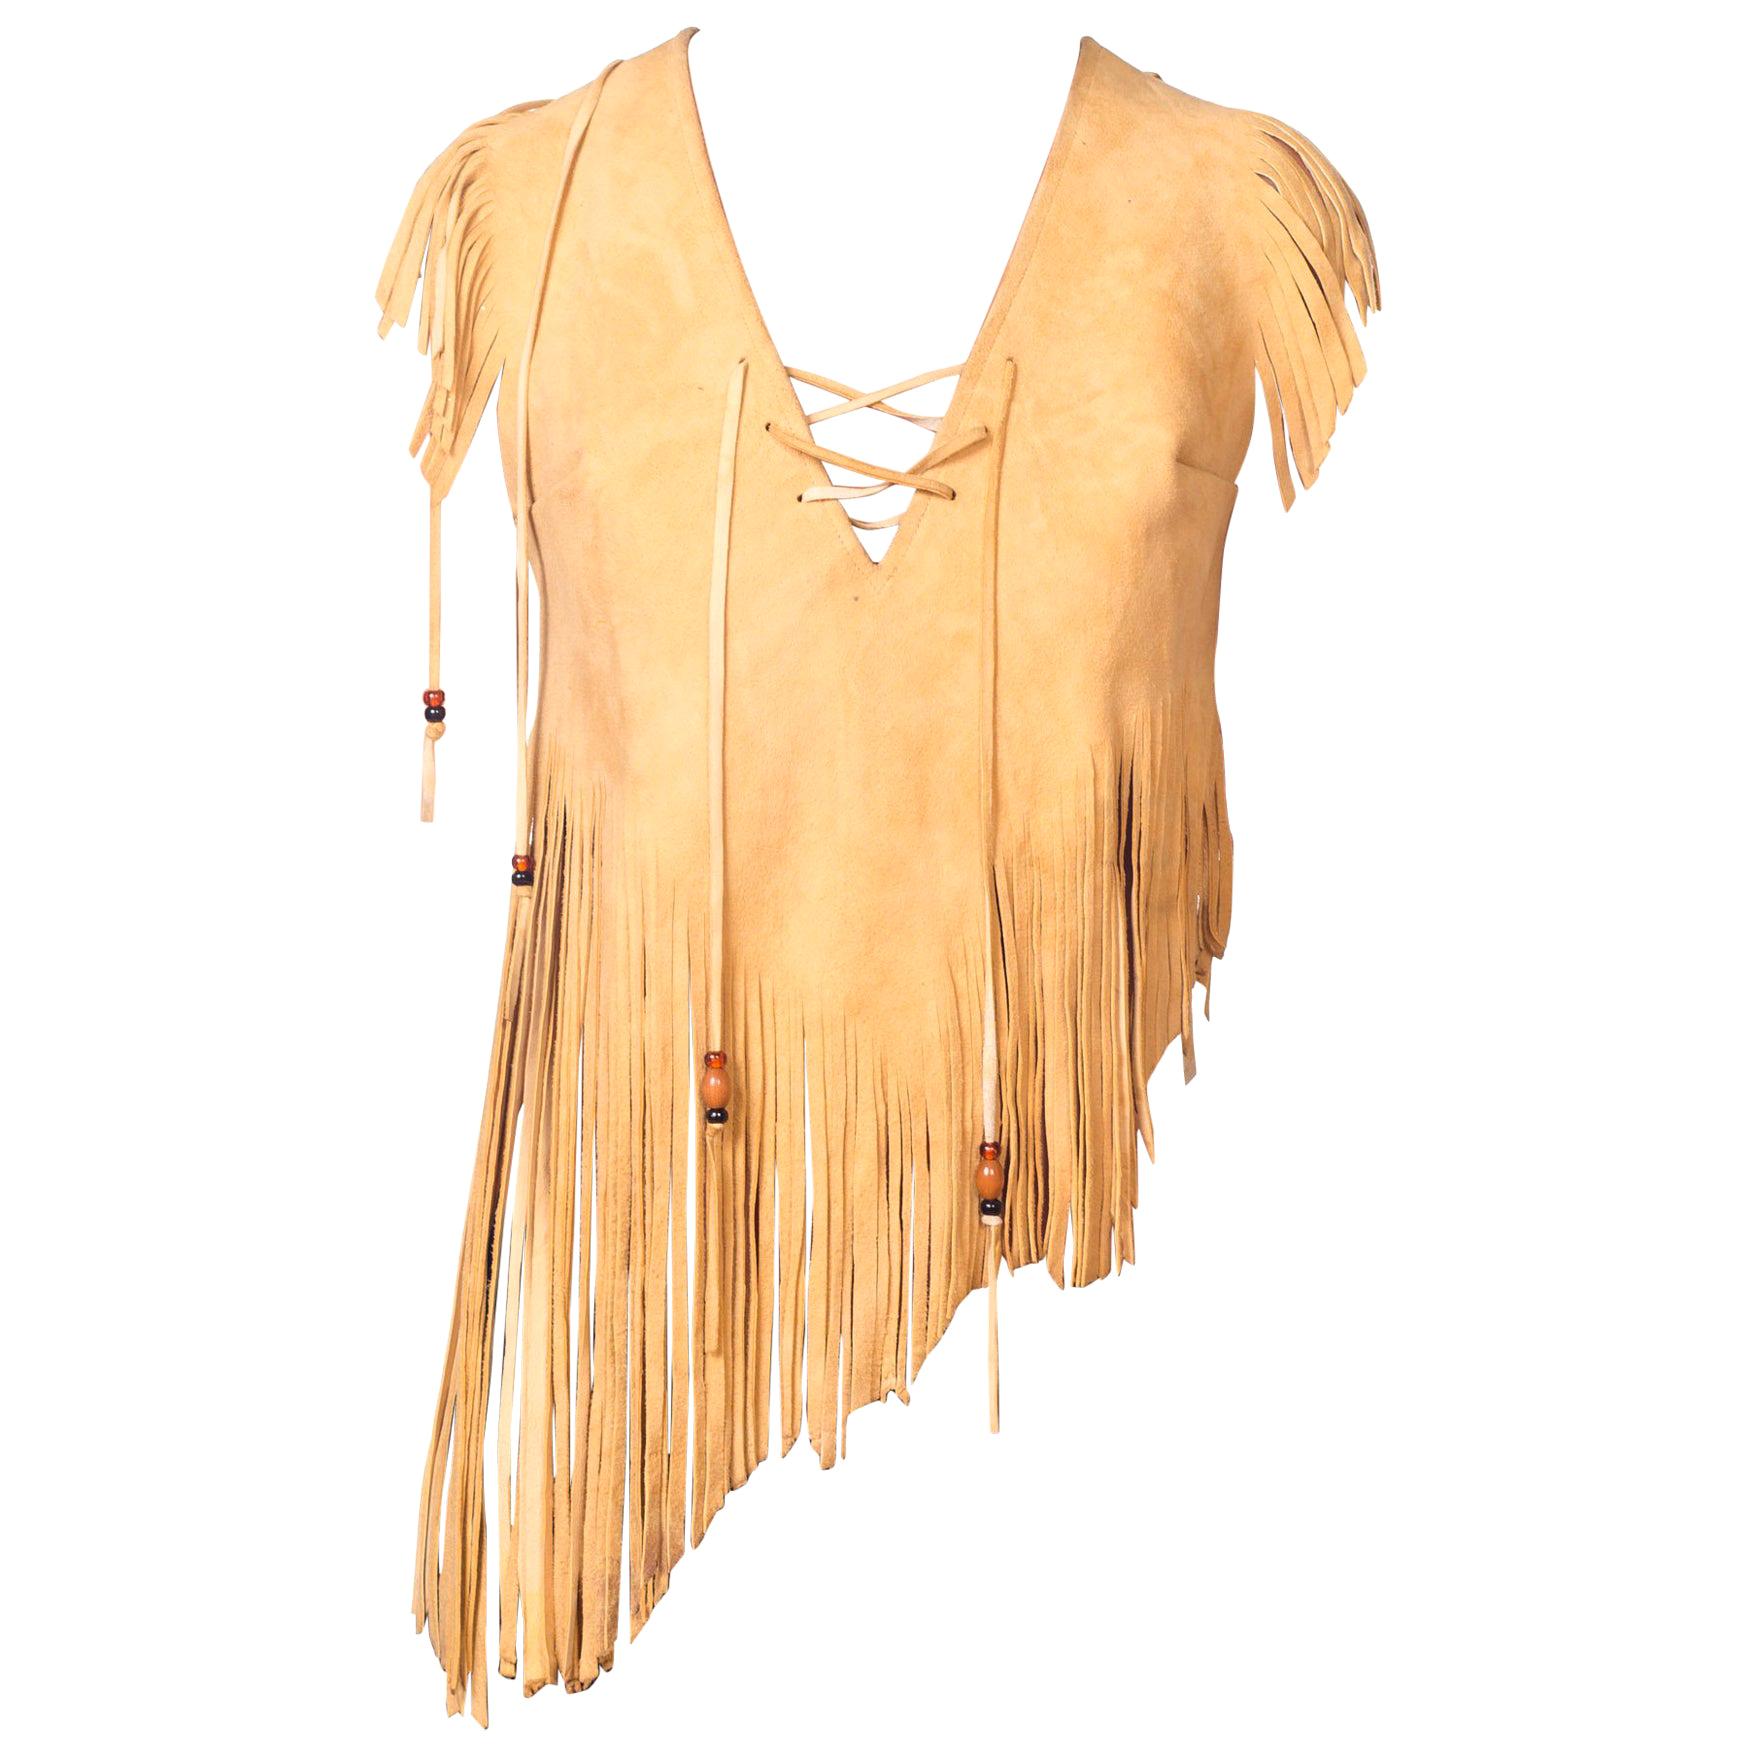 1970S Yellow Tan Suede Leather Beaded Fringe Lace Up Crop Tops Shirt